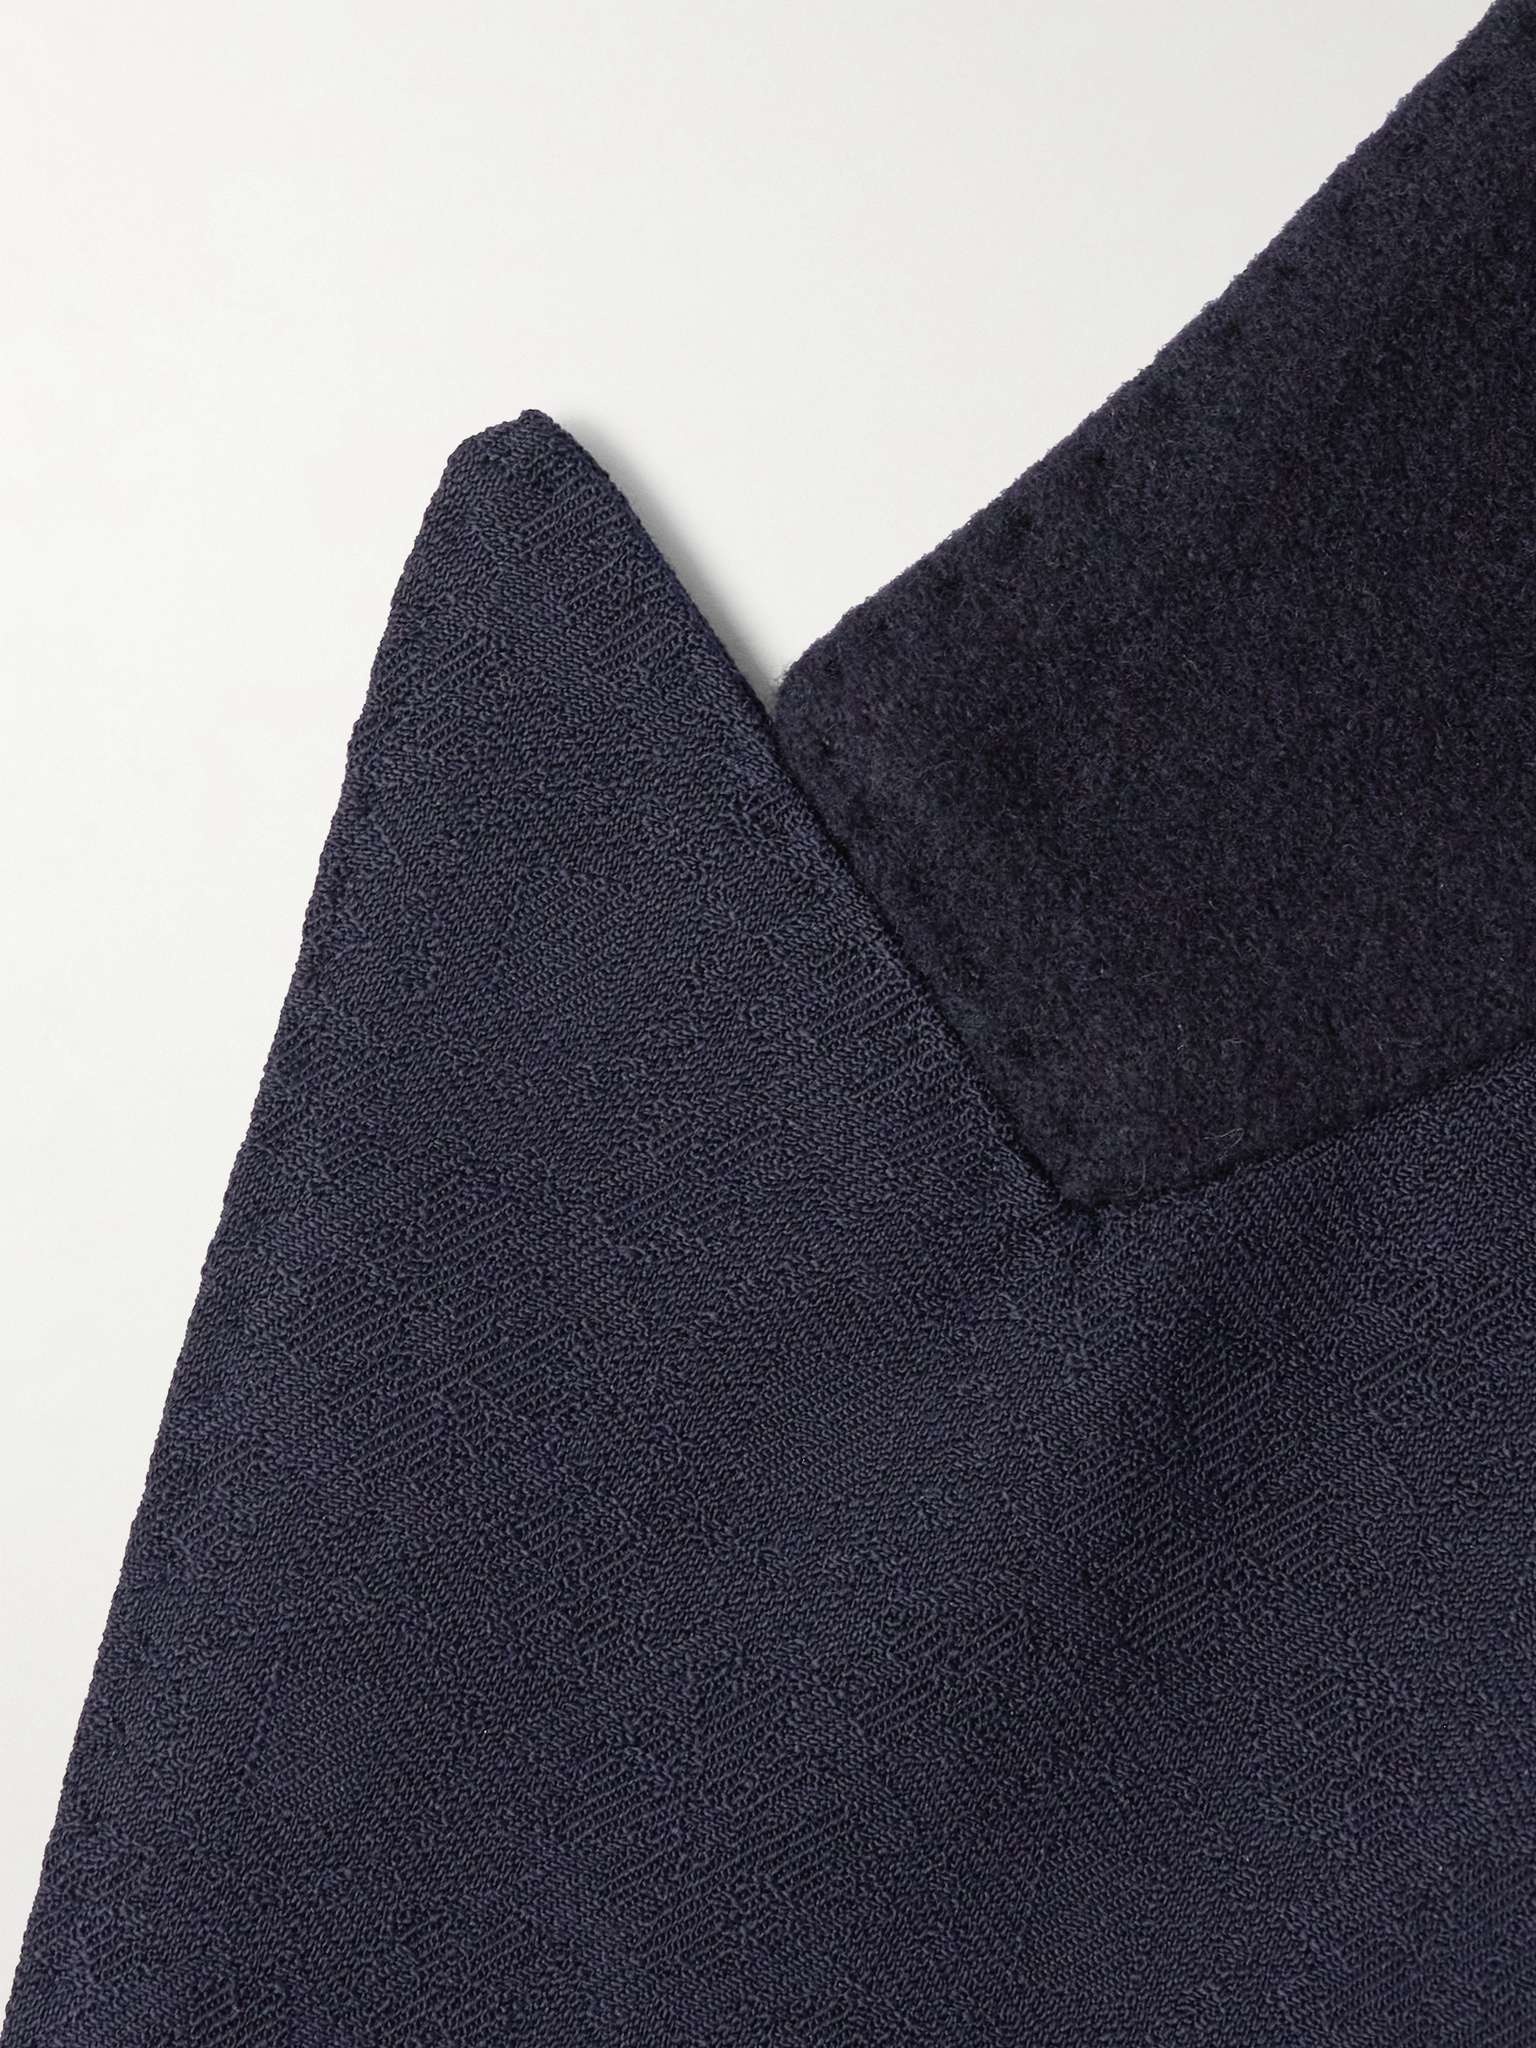 Double-Breasted Felt-Trimmed Wool-Jacquard Suit Jacket - 3